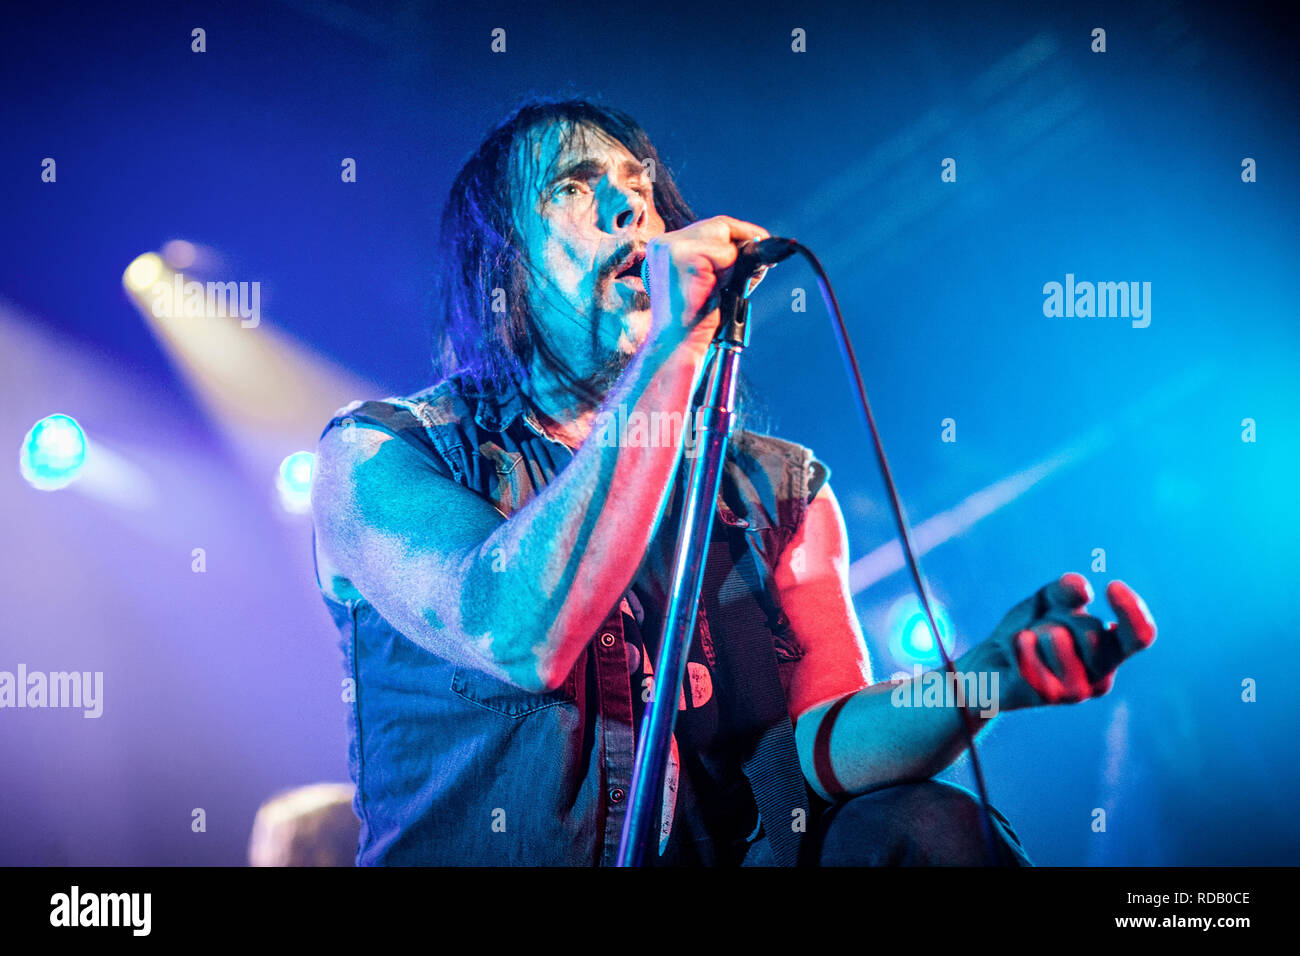 Norway, Oslo - January 13, 2019. The American stoner rock band Monster Magnet performs a live concert at Parkteatret in Oslo. Here vocalist Dave Wyndorf is seen live on stage. (Photo credit: Gonzales Photo - Terje Dokken). Stock Photo